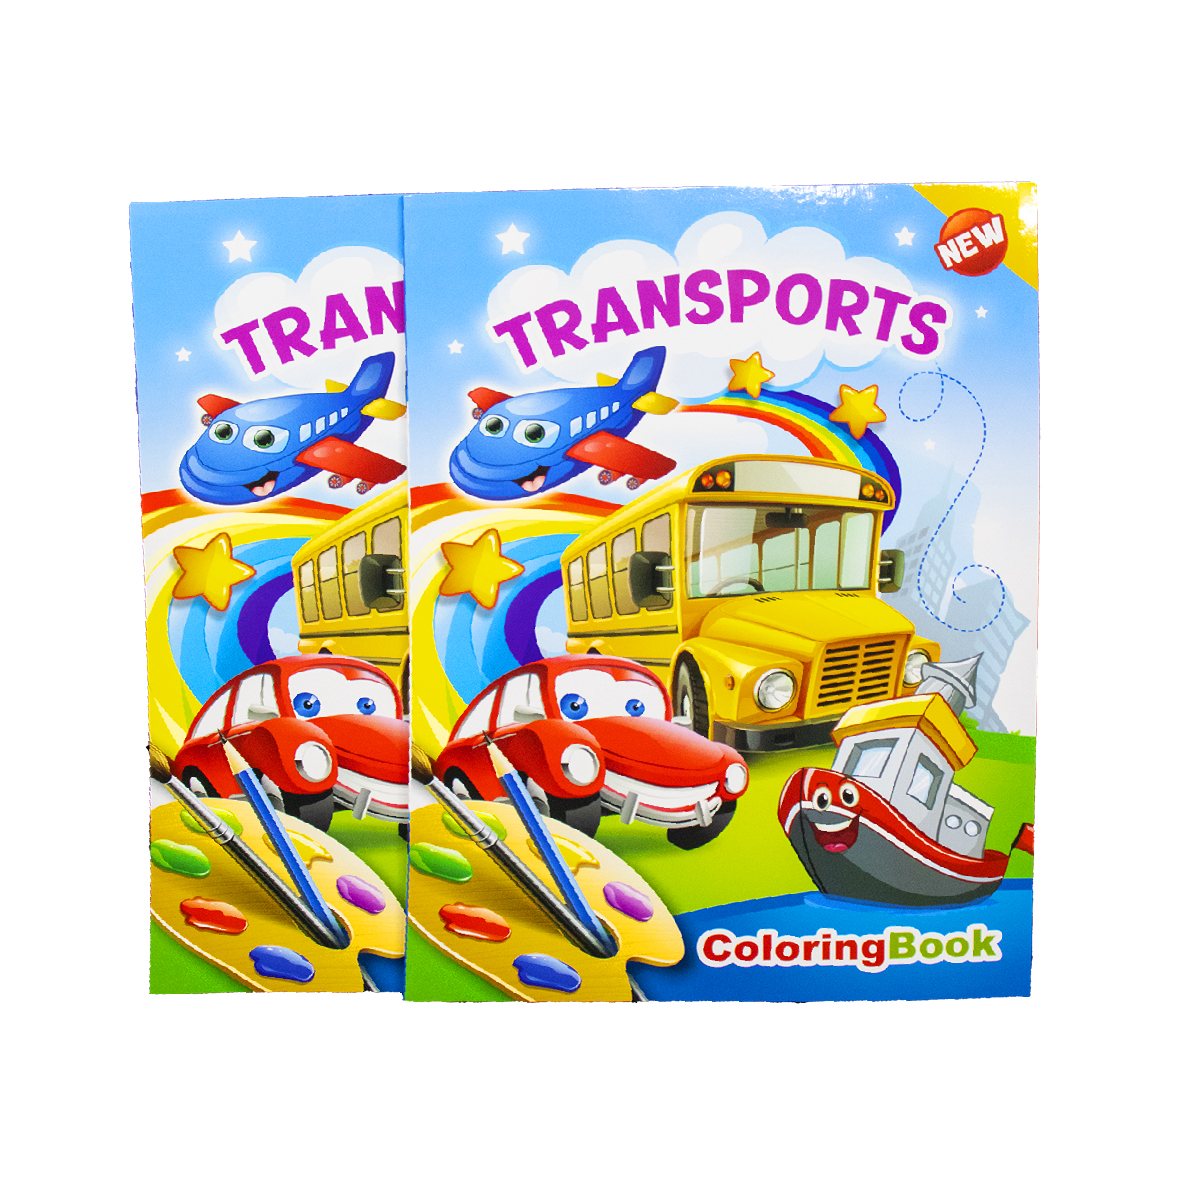 Coloring book for children pictures of transportation size xcm